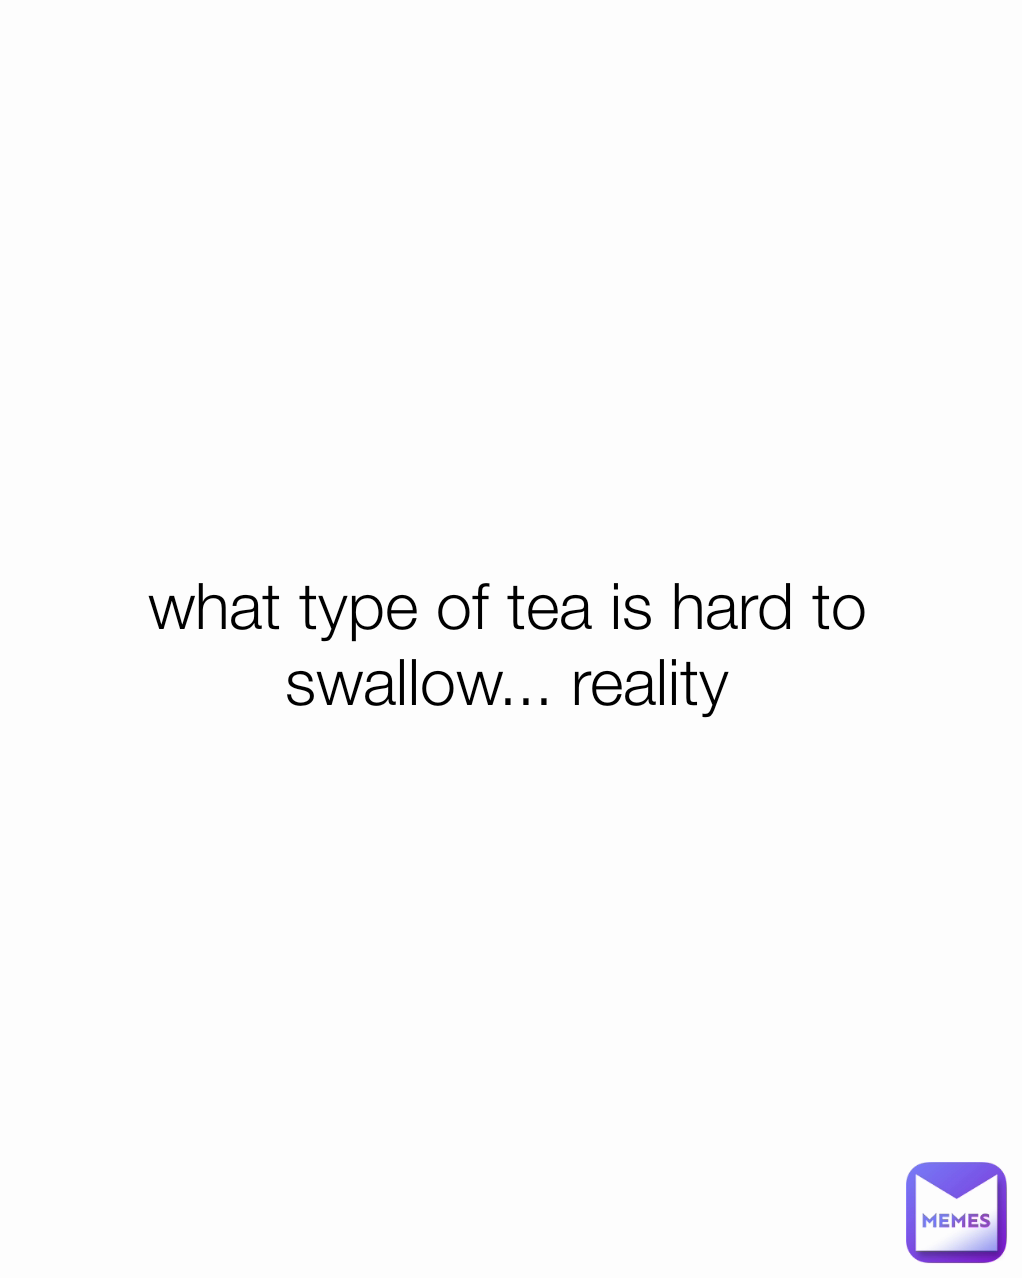 what type of tea is hard to swallow... reality